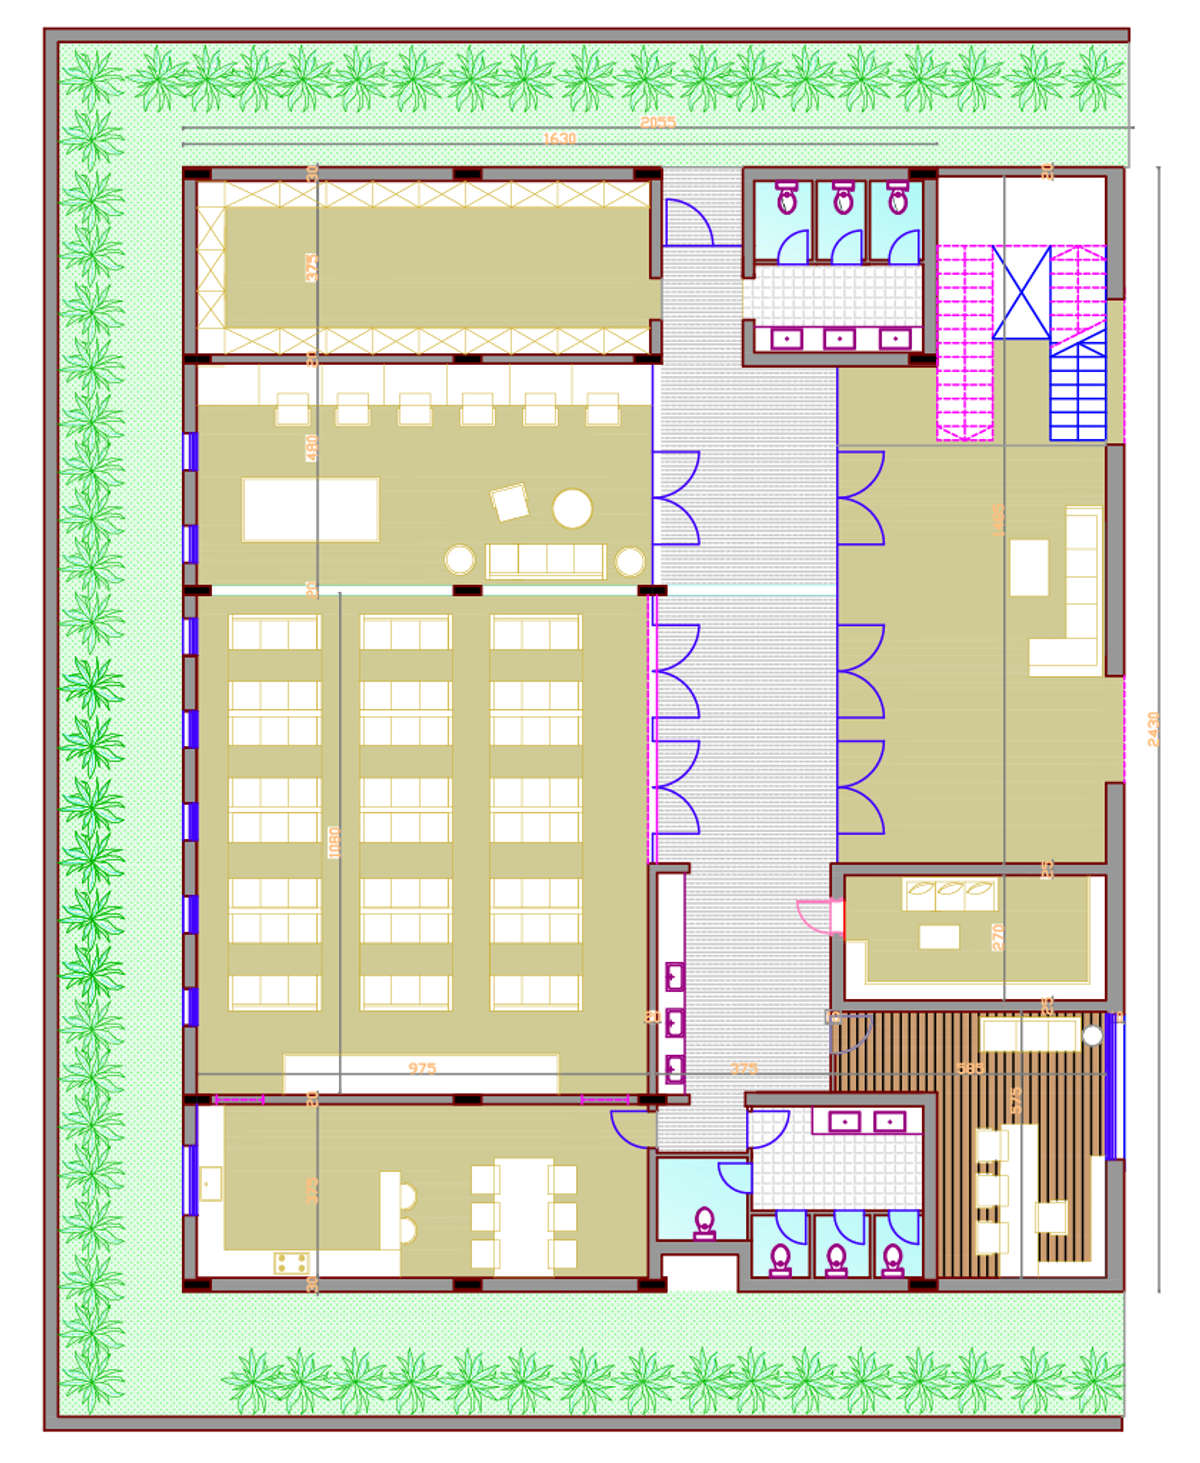 This plan was prepared for a client of Upwork. in which we had to do a better presentation
GREEN Special Homes services are fully centered around the client and their visions. We cater to all services related to architecture, structural designing and interior design etc. We are known for delivering top-notch Architectural designing solutions and our satisfied customers are proof for it. Our projects include residential, commercial, institutional and other architectural and interior services. Our first priority is client satisfaction with innovative and quality approach towards our project. 

Contact us +917869293677.Call/Whatsapp.
Email :- greenspecialhomes@gmail.com
Website :- http://Green-house-constructions.ueniweb.com

#architecture #design #elevation #greenspecialhomes #interiordesign #architect #interior #construction #exteriordesign #home #architecturedesign #building #exterior #architecturelovers #homedecor #autocad #interiordesigner #rendering #civilengineering #designer #rend